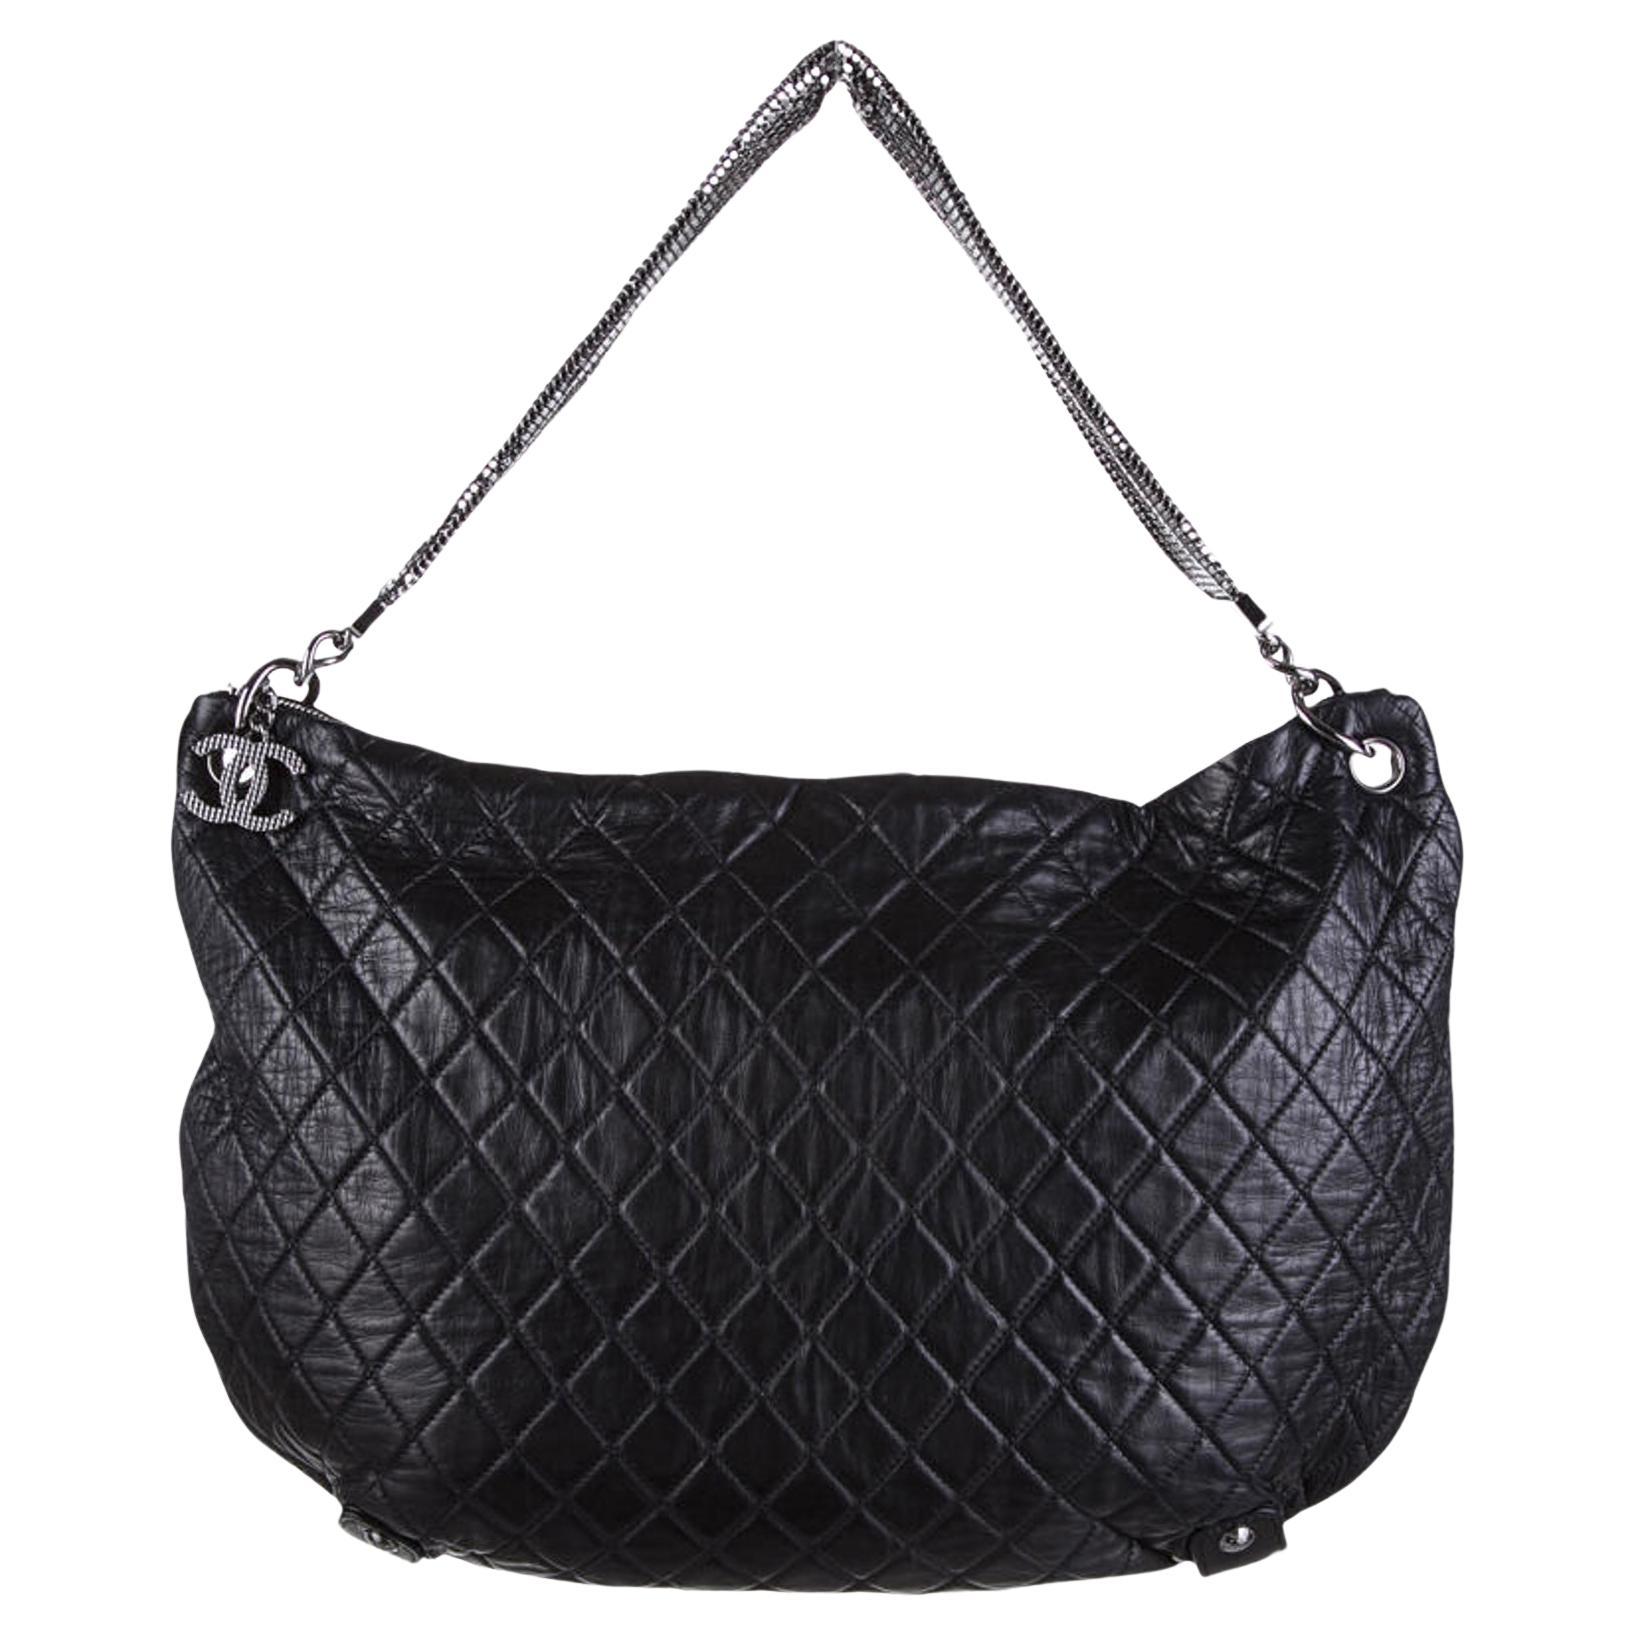 Chanel Metallic Mesh Limited Edition Soft Quilted Black Lambskin Leather Hobo